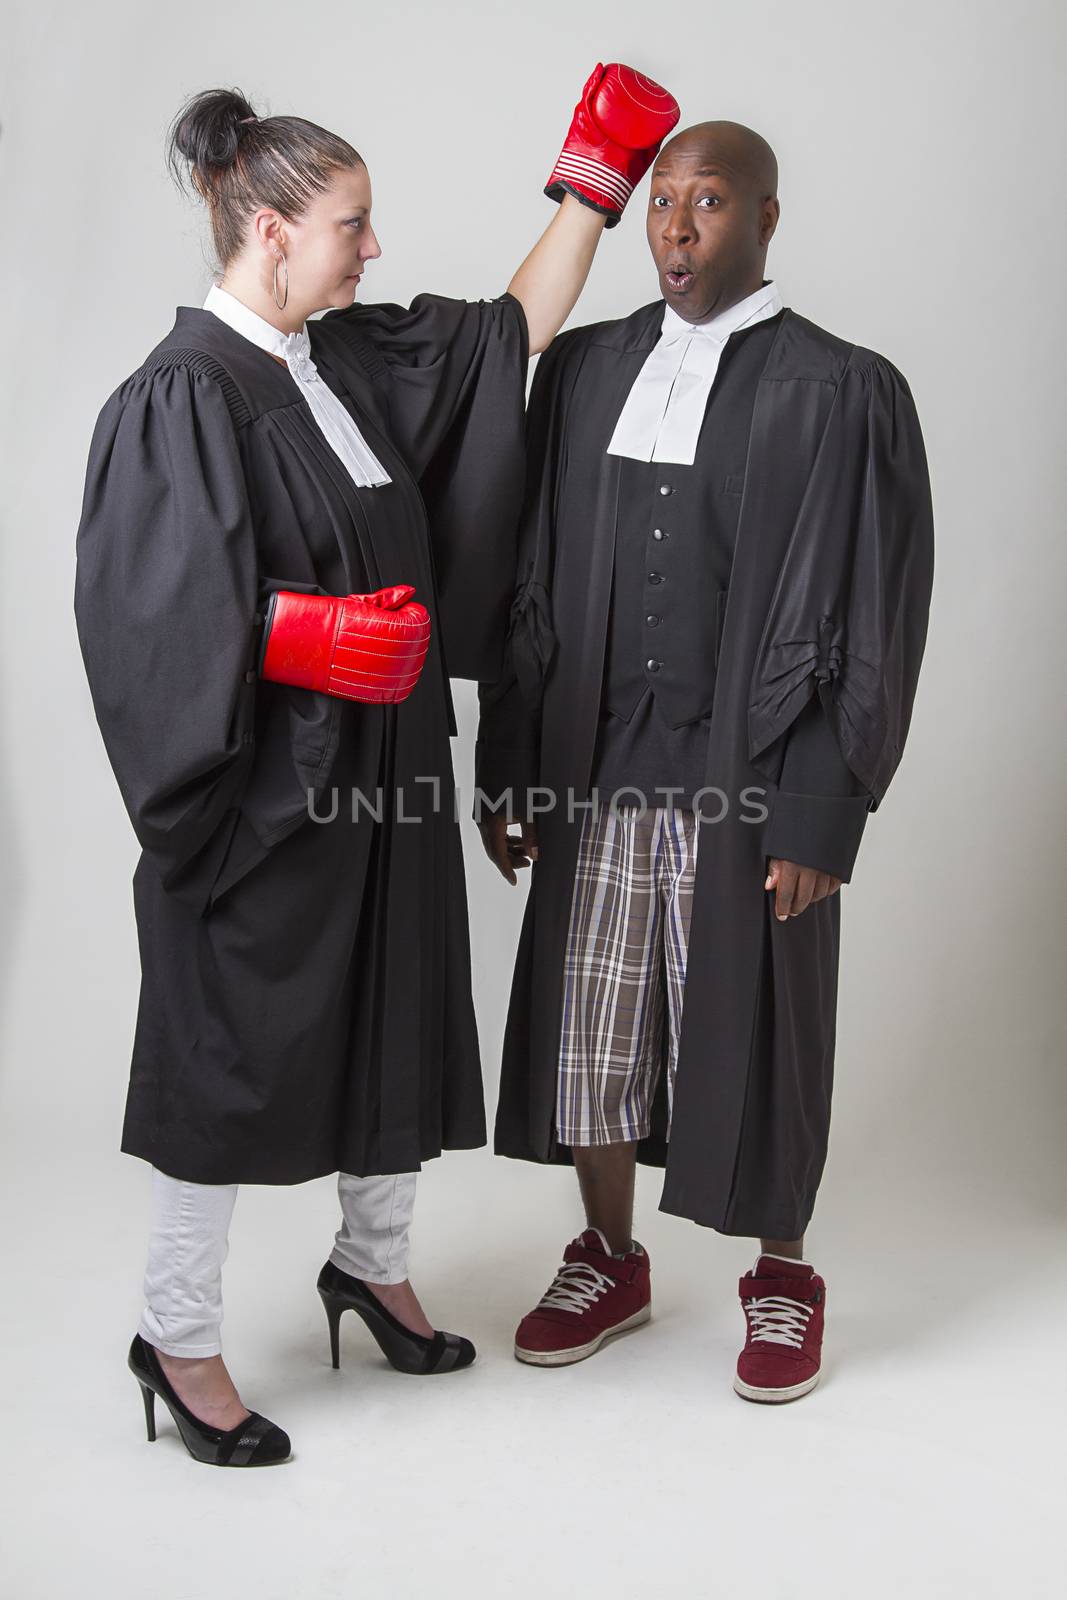 woman punching a man on the head, both wearing canadian lawyers toga